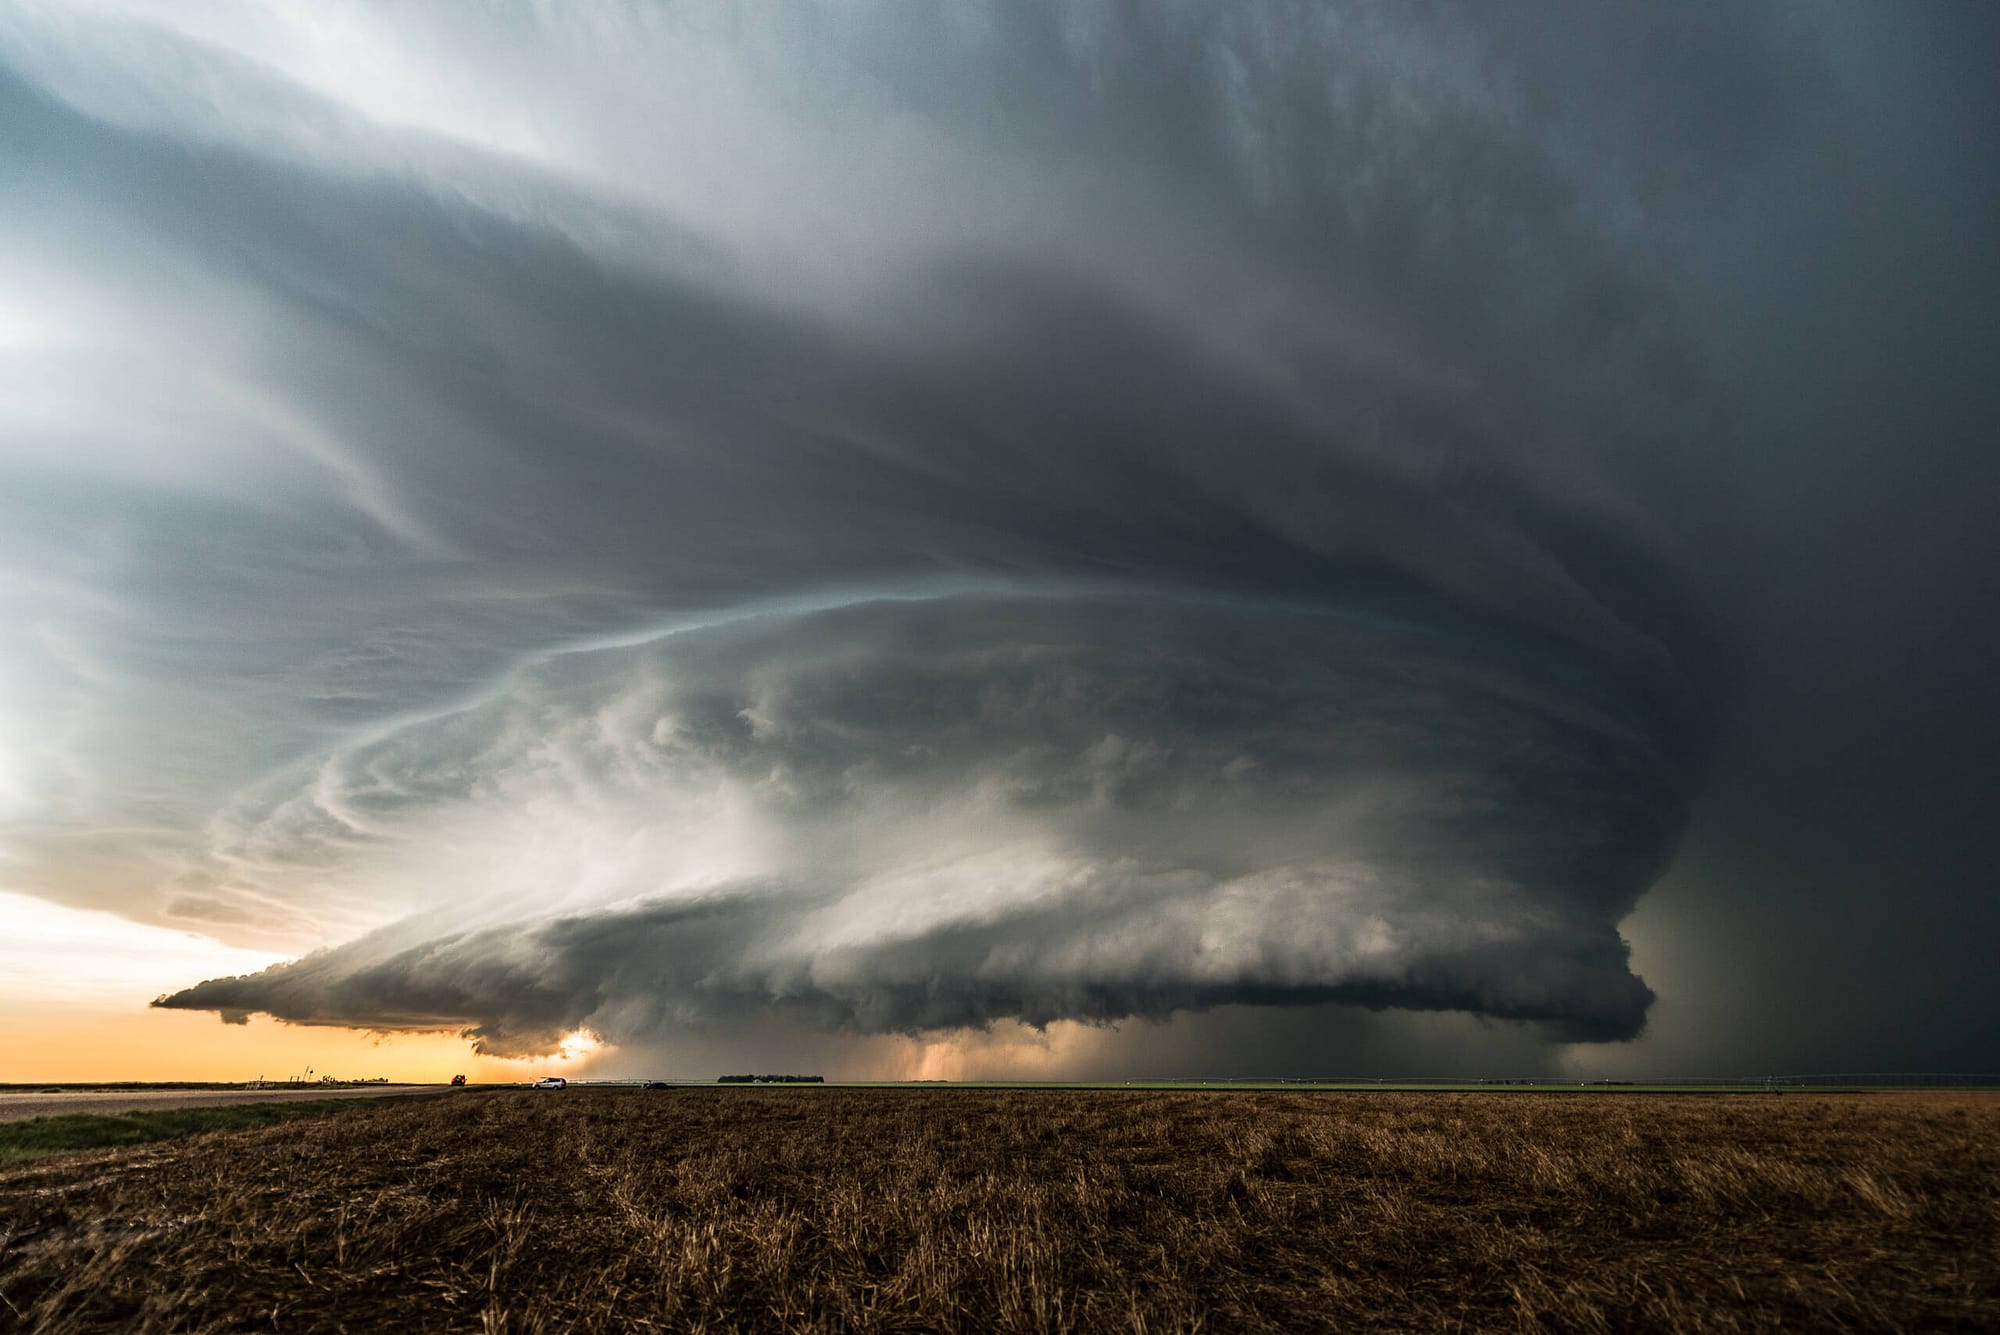 A supercell tornado about to touch down over a large field at dusk.